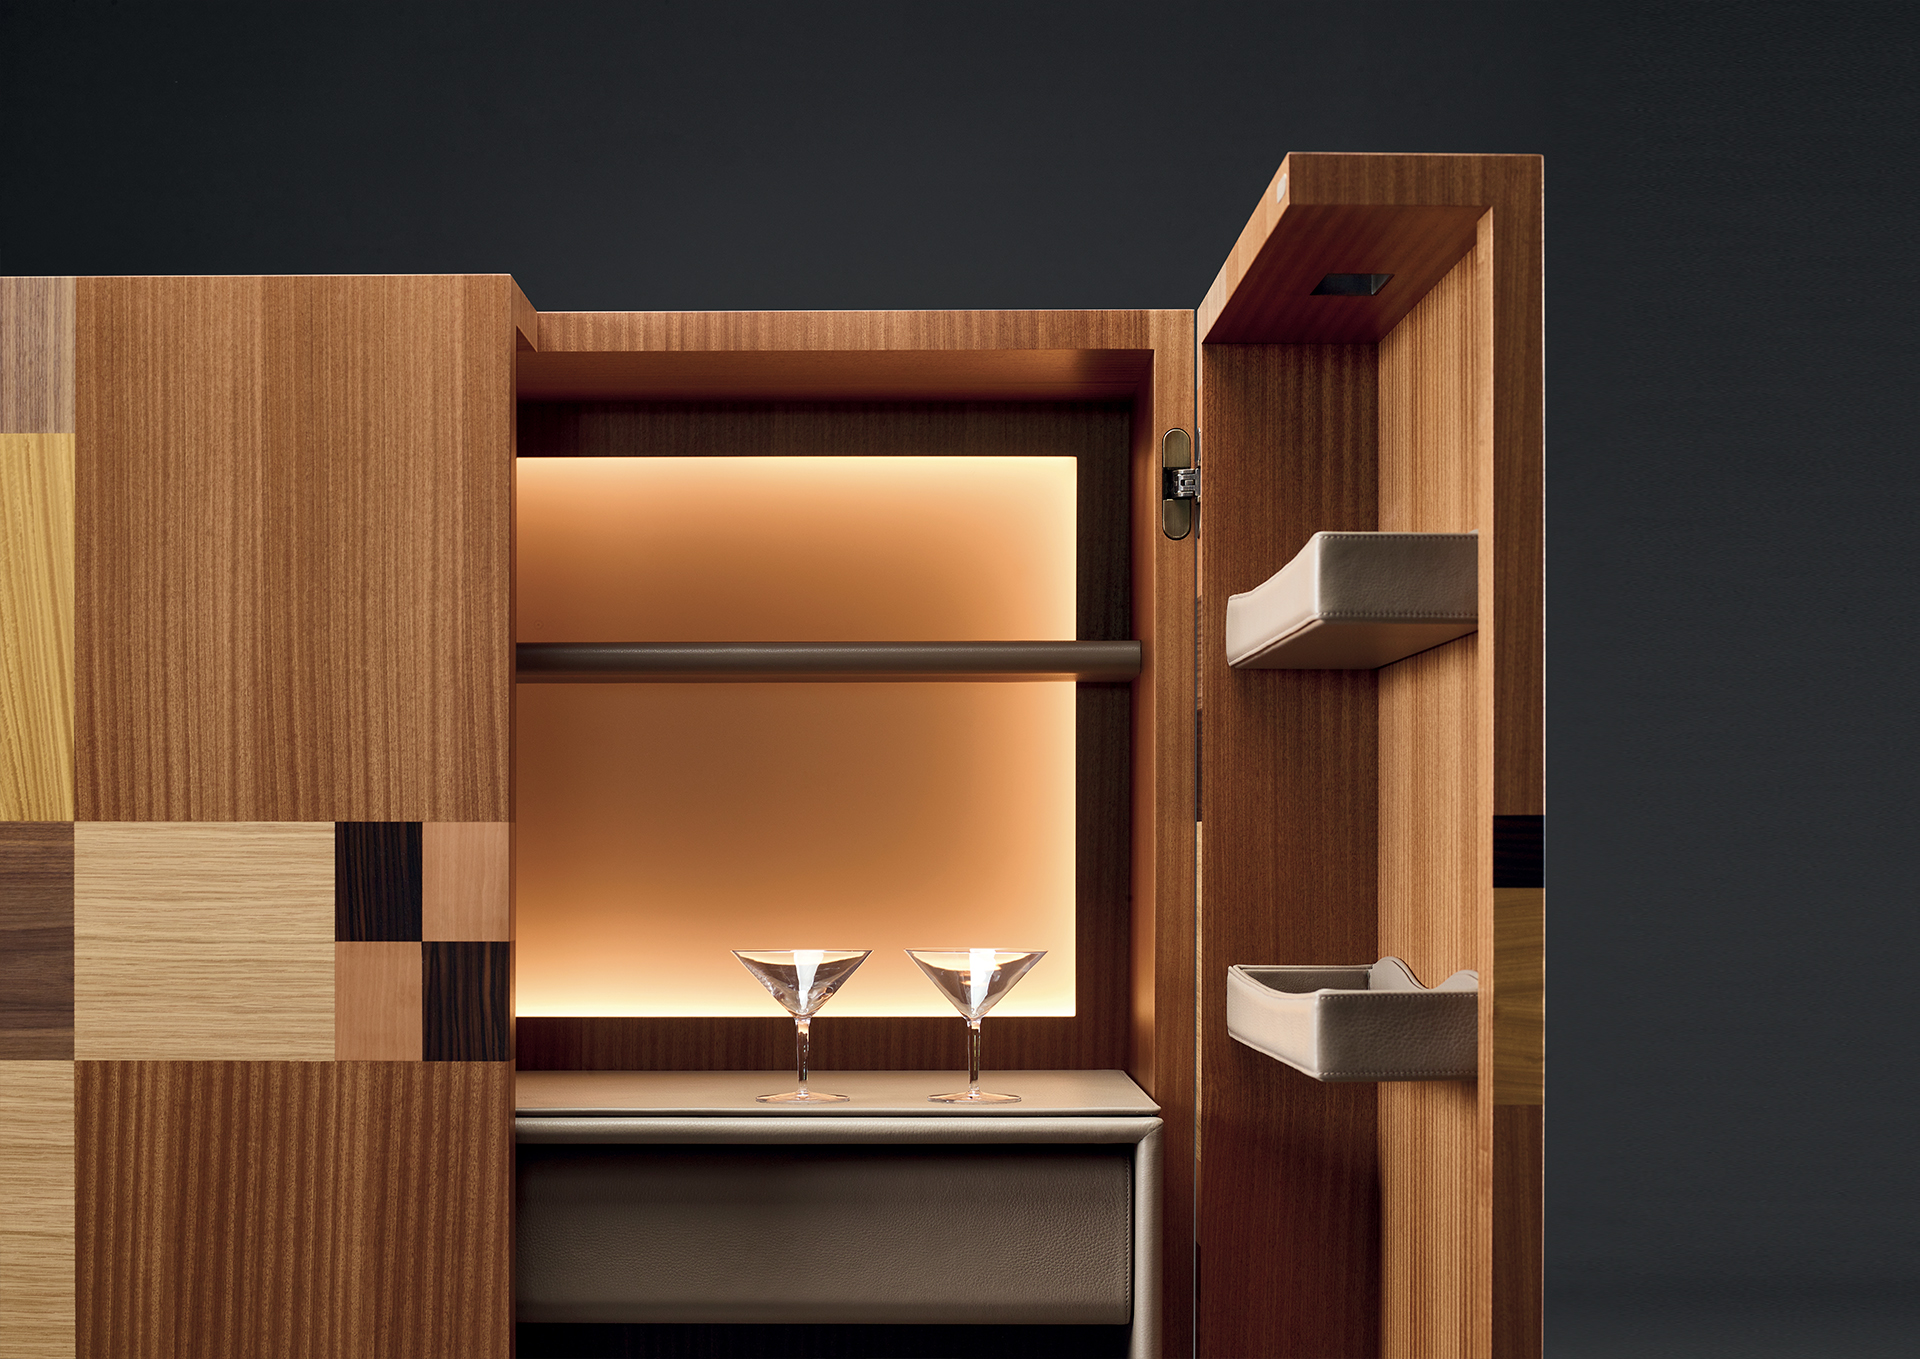 Bacco, a wooden cabinet-bar with patchwork inlay and several accessories inside and bronze base, profiles and handles, from Promemoria's catalogue | Promemoria